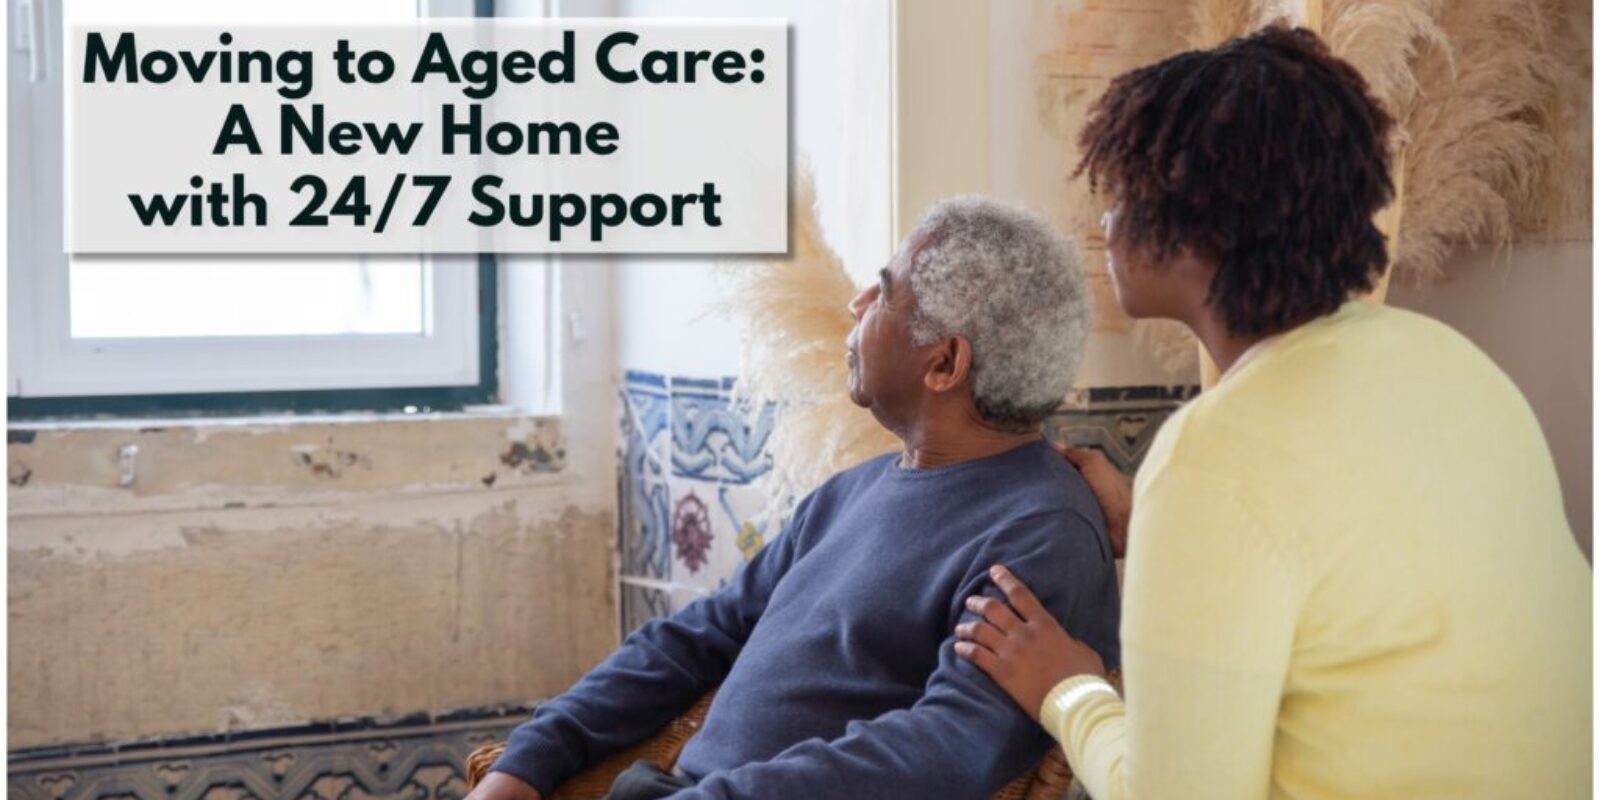 Moving to an Aged Care - A New Home with round the clock support